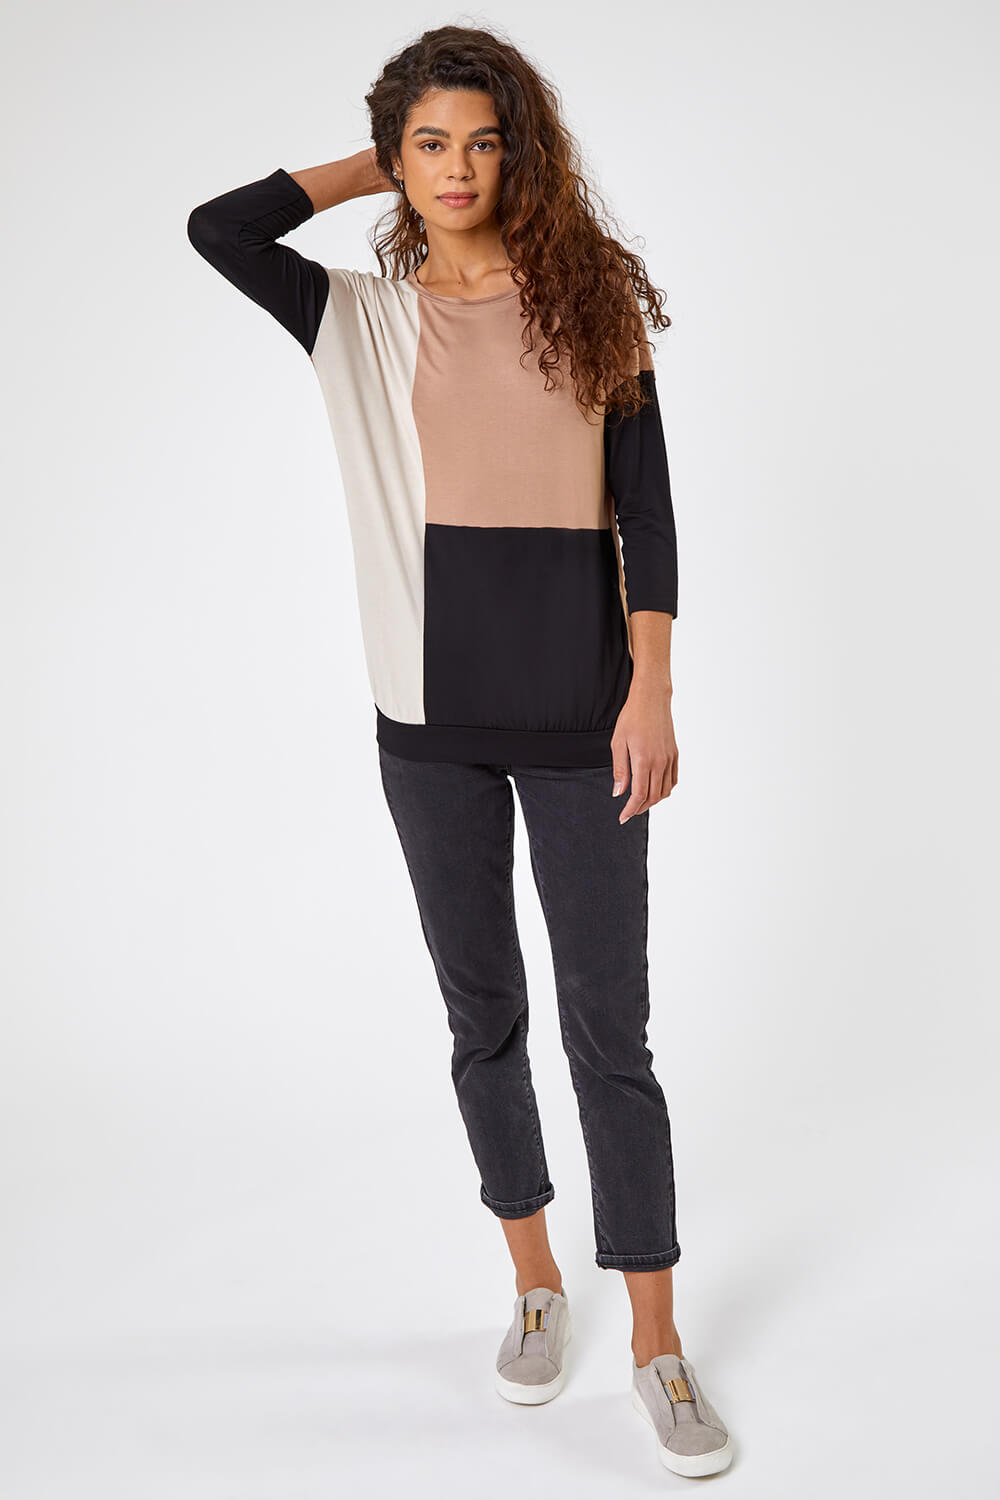 Camel  Colour Block Jersey Stretch Top, Image 3 of 5